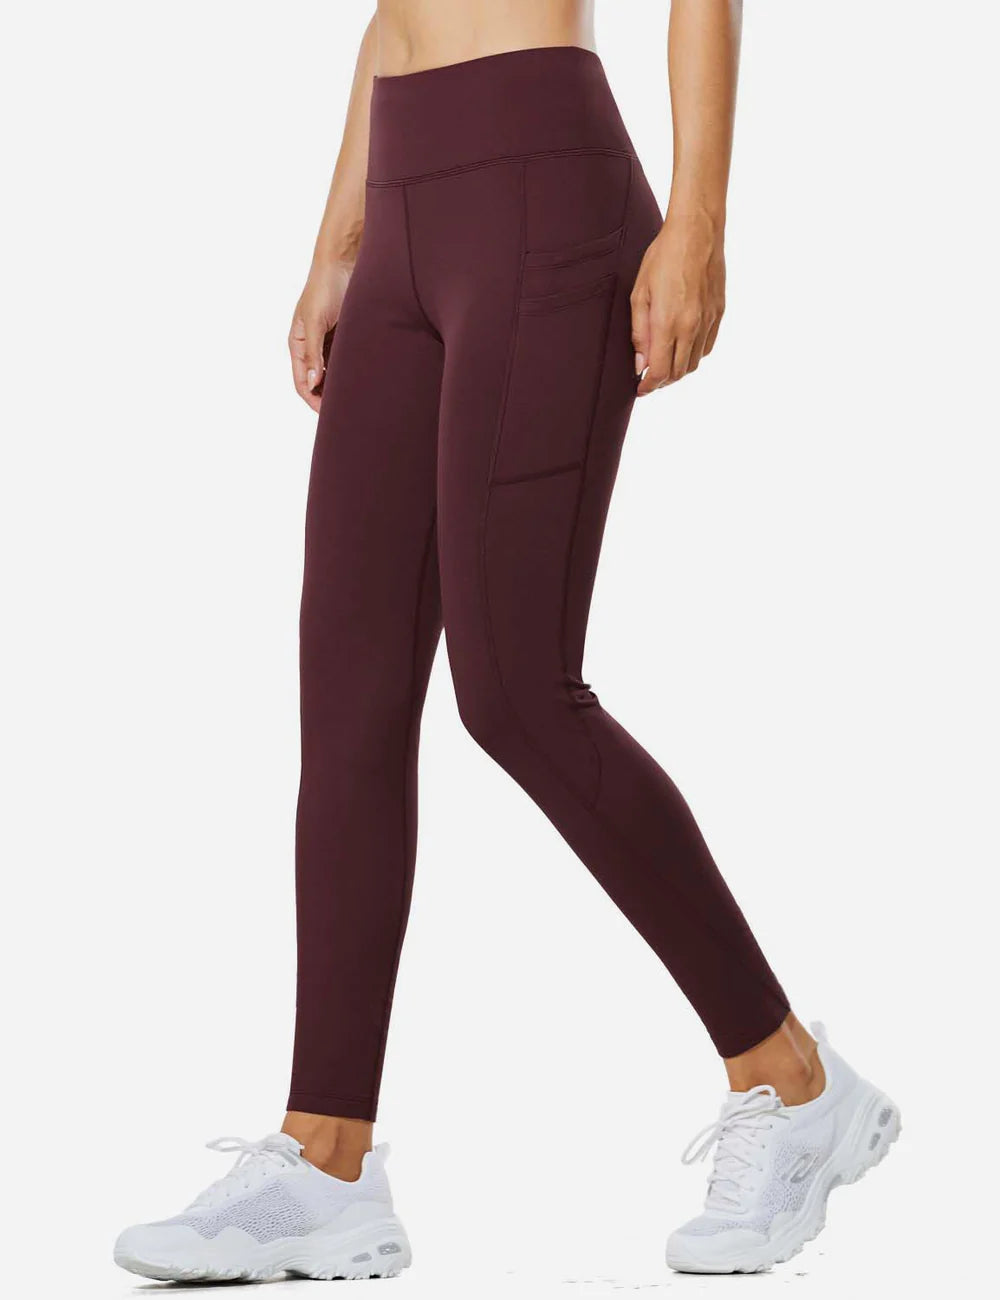 Why Choose Fleece-lined Leggings This Winter